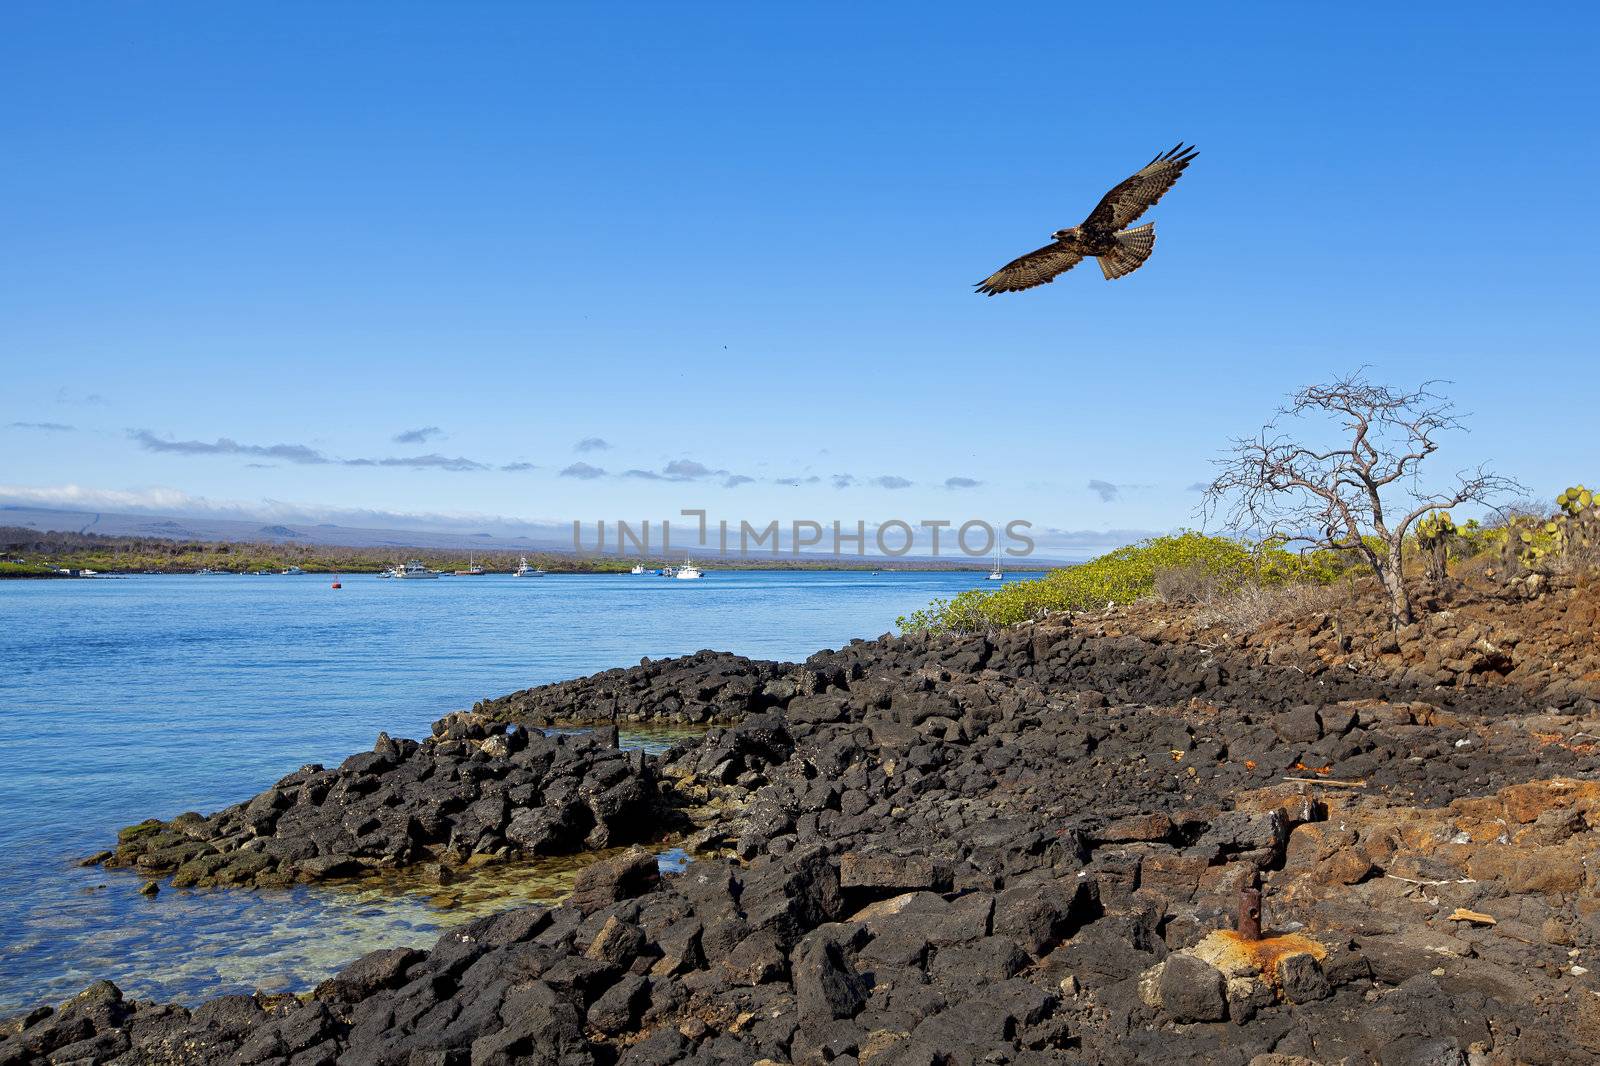 Galapagos Hawk flying over dry land and ocean